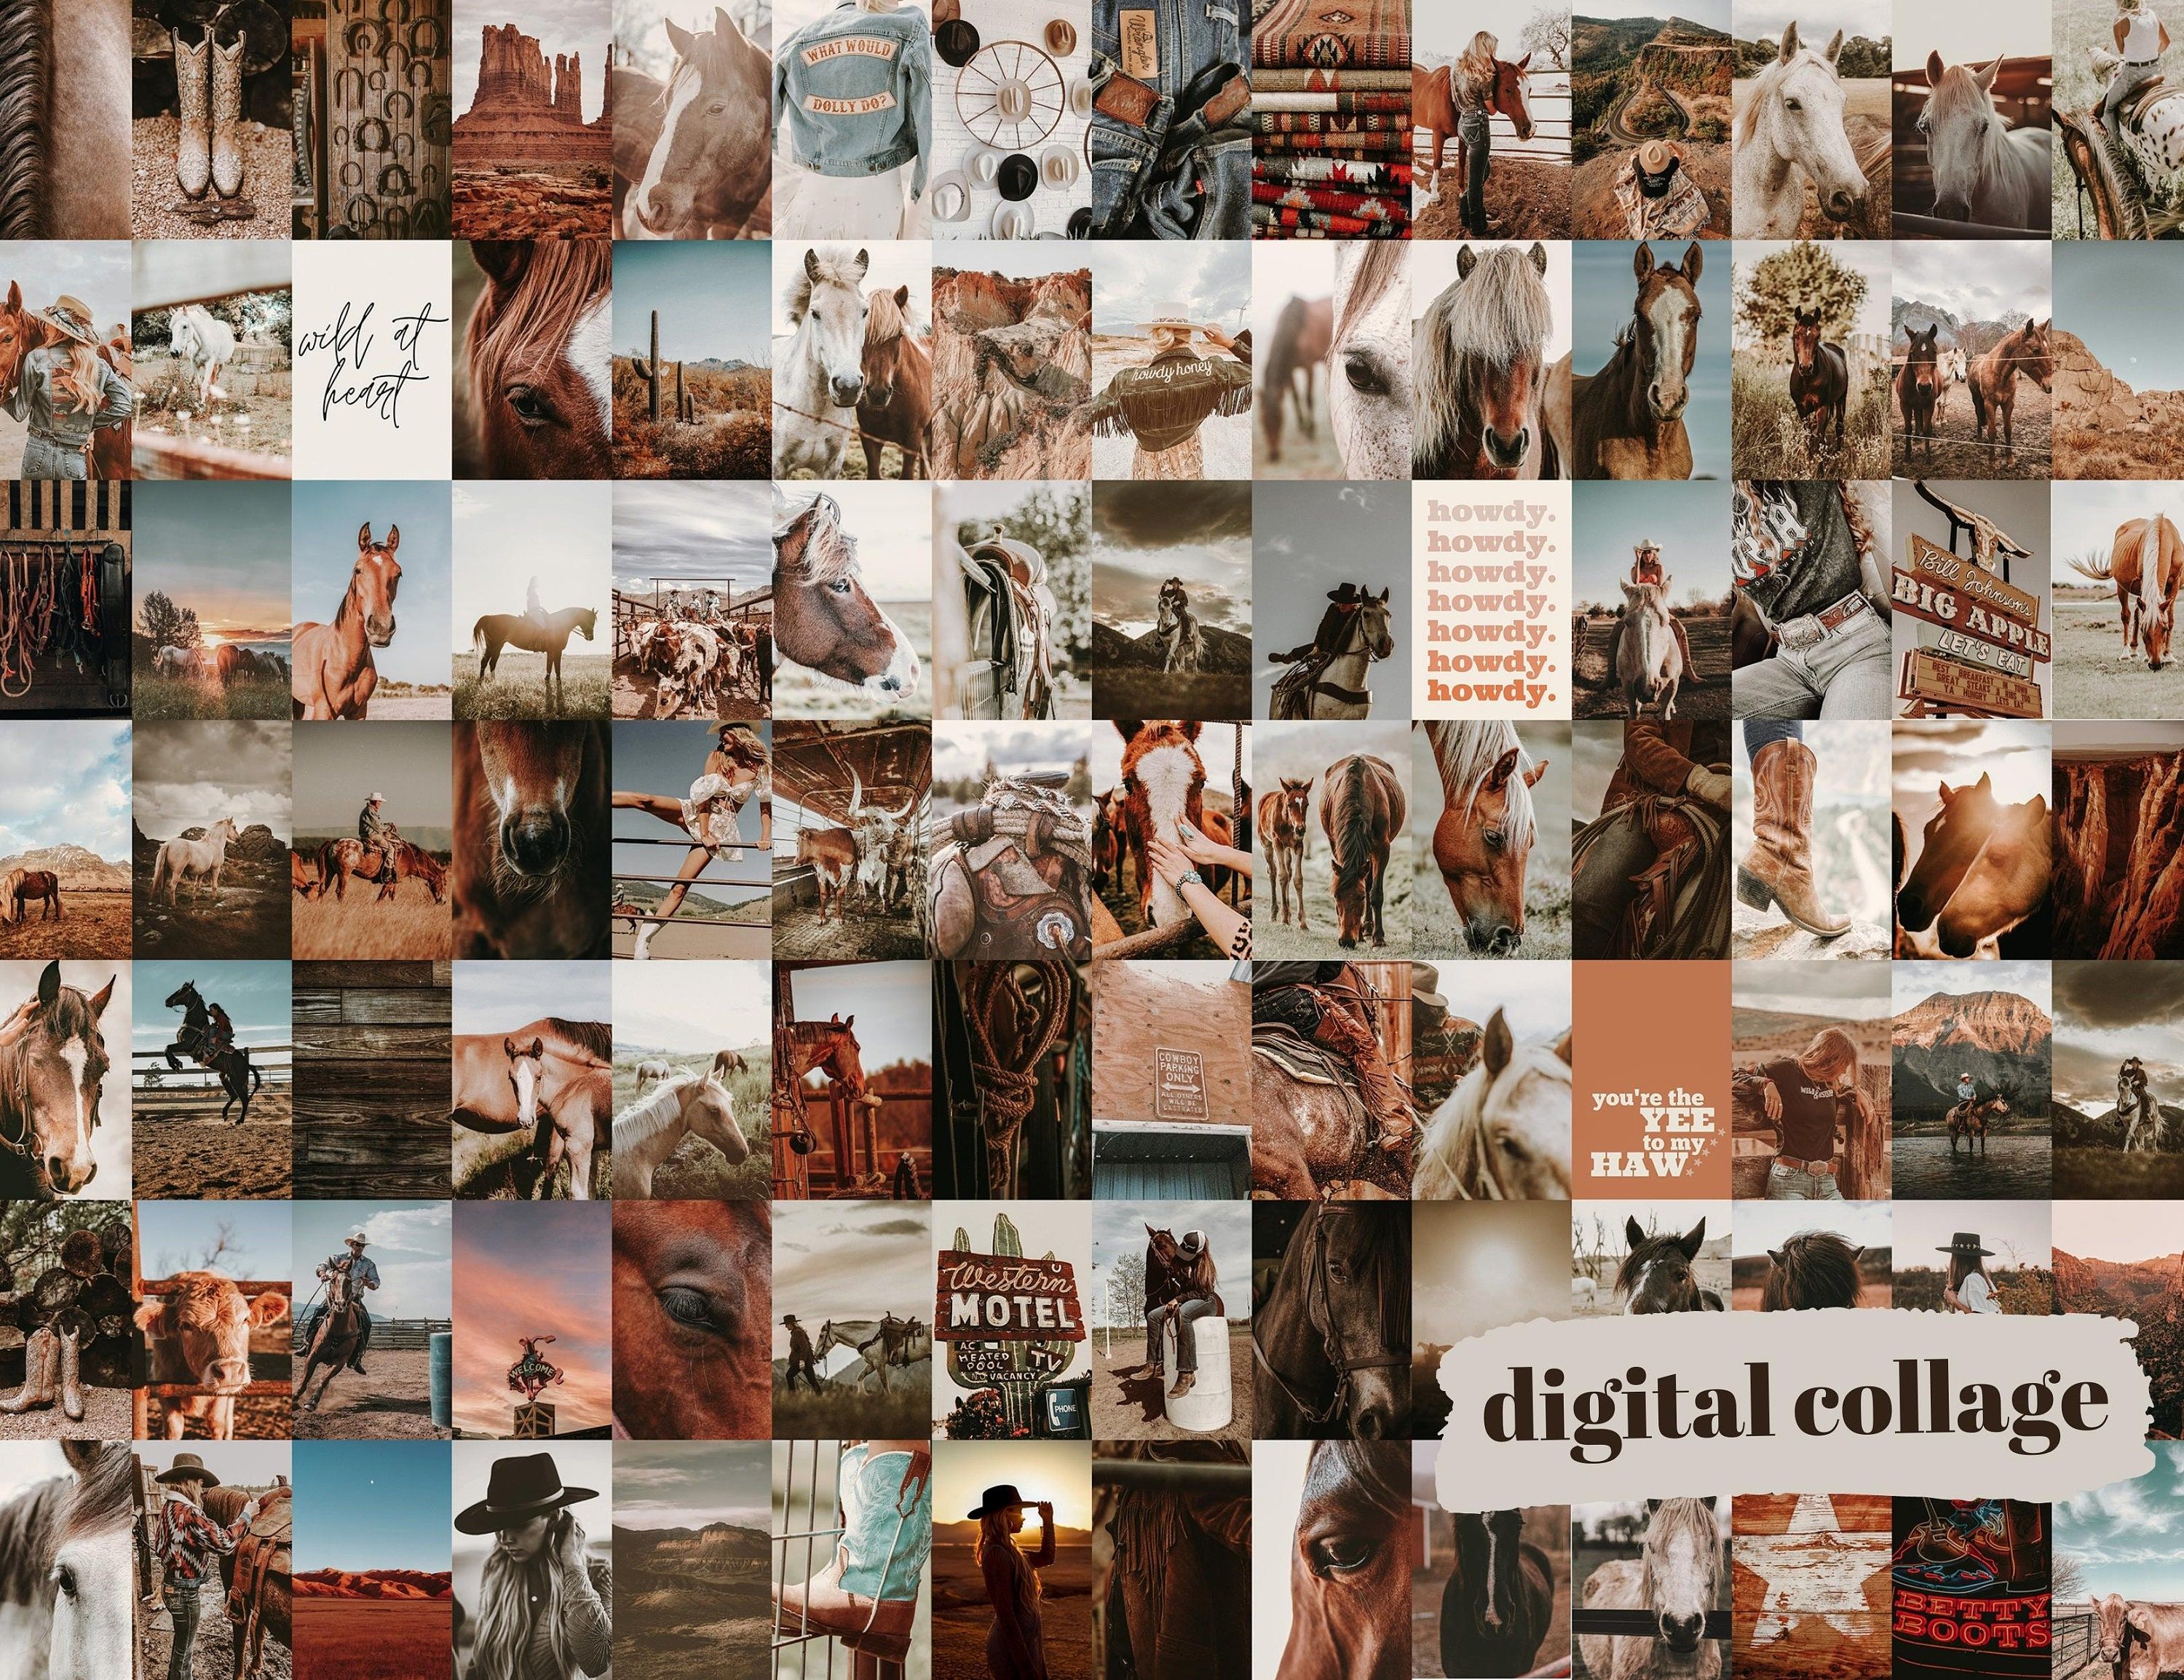 A digital collage of horses and western imagery - Western